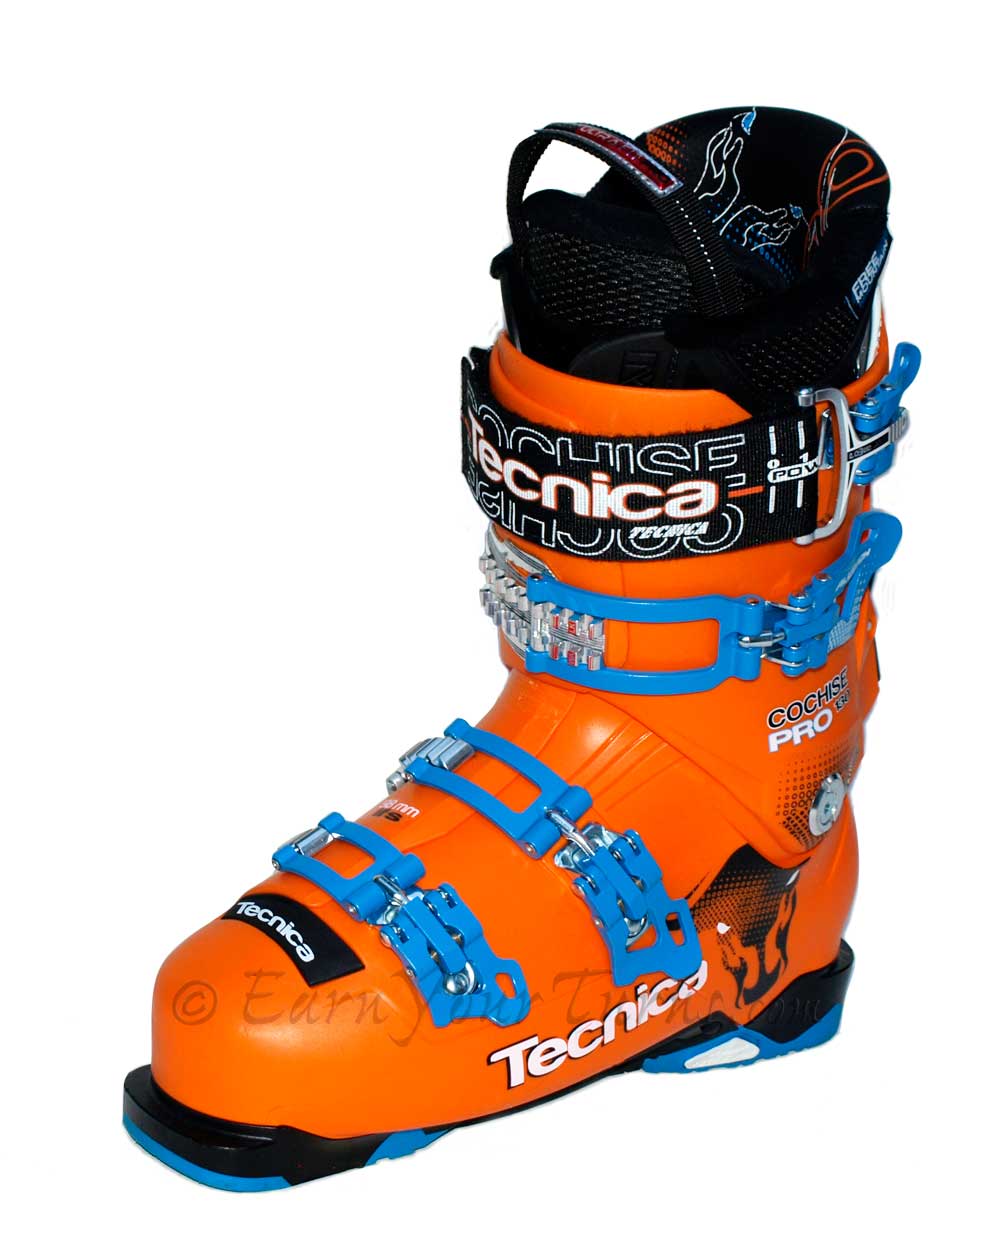 Boot Review: Tecnica upgrades Cochise 